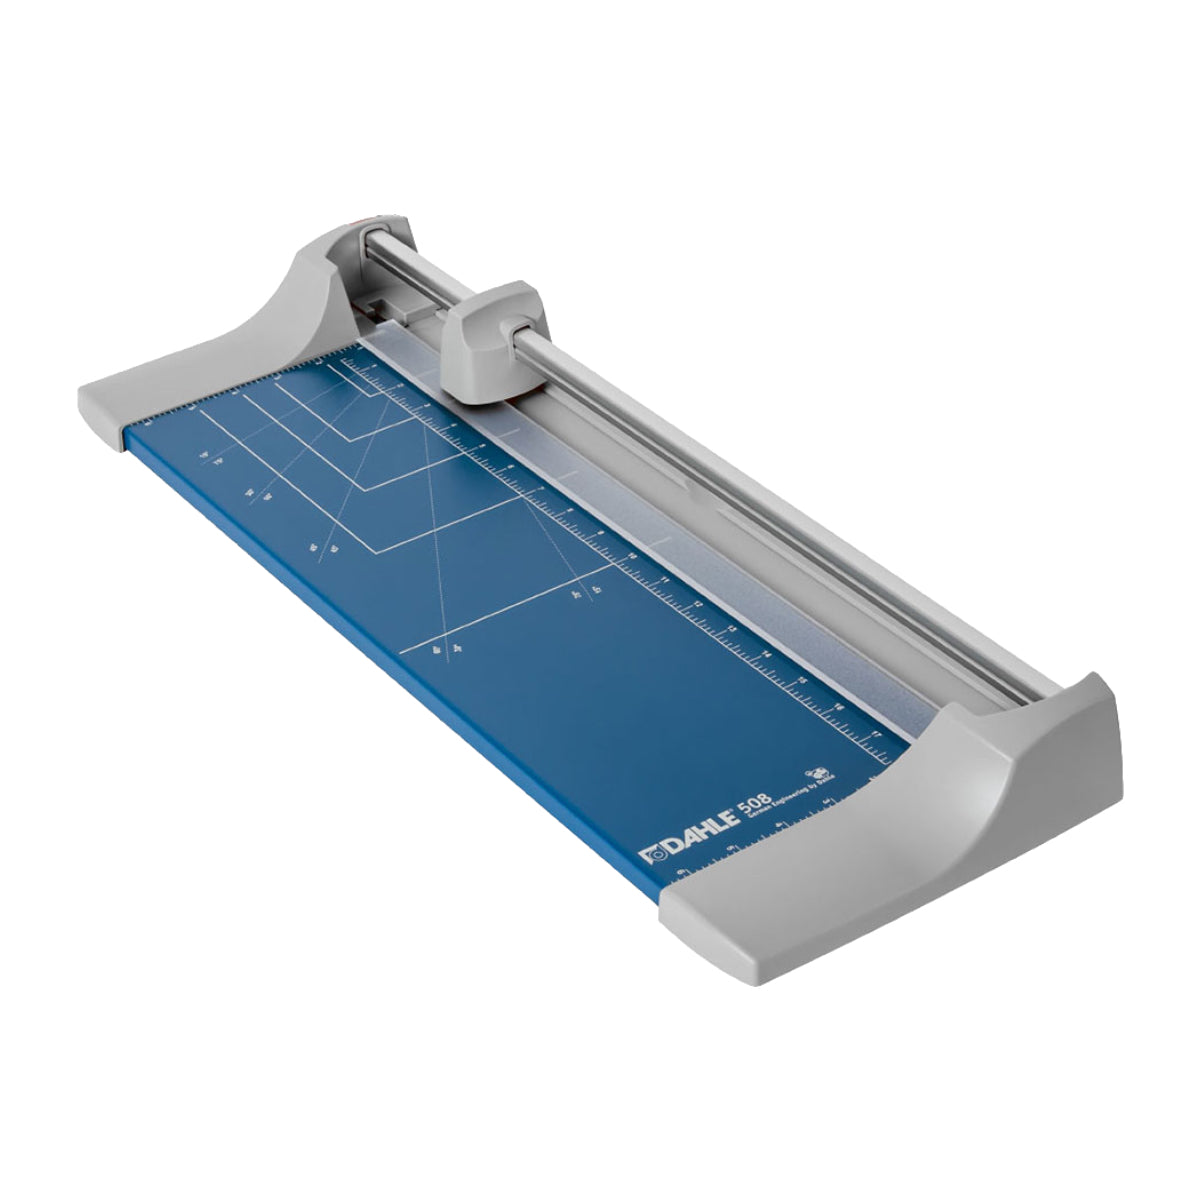 Dahle 508 Personal A3 Rotary Trimmer